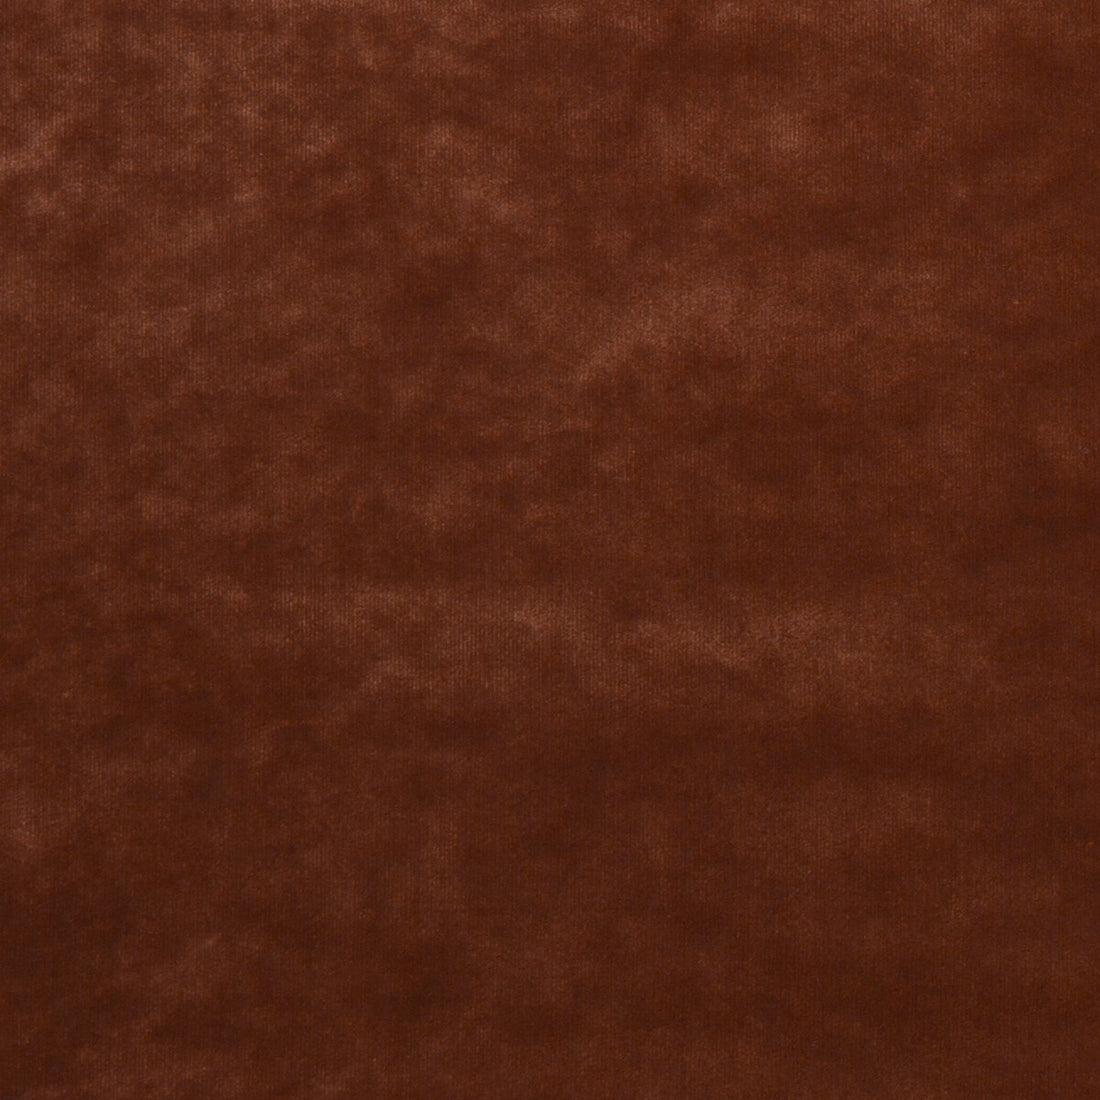 Mercury fabric in rust color - pattern ED85222.395.0 - by Threads in the Odyssey collection